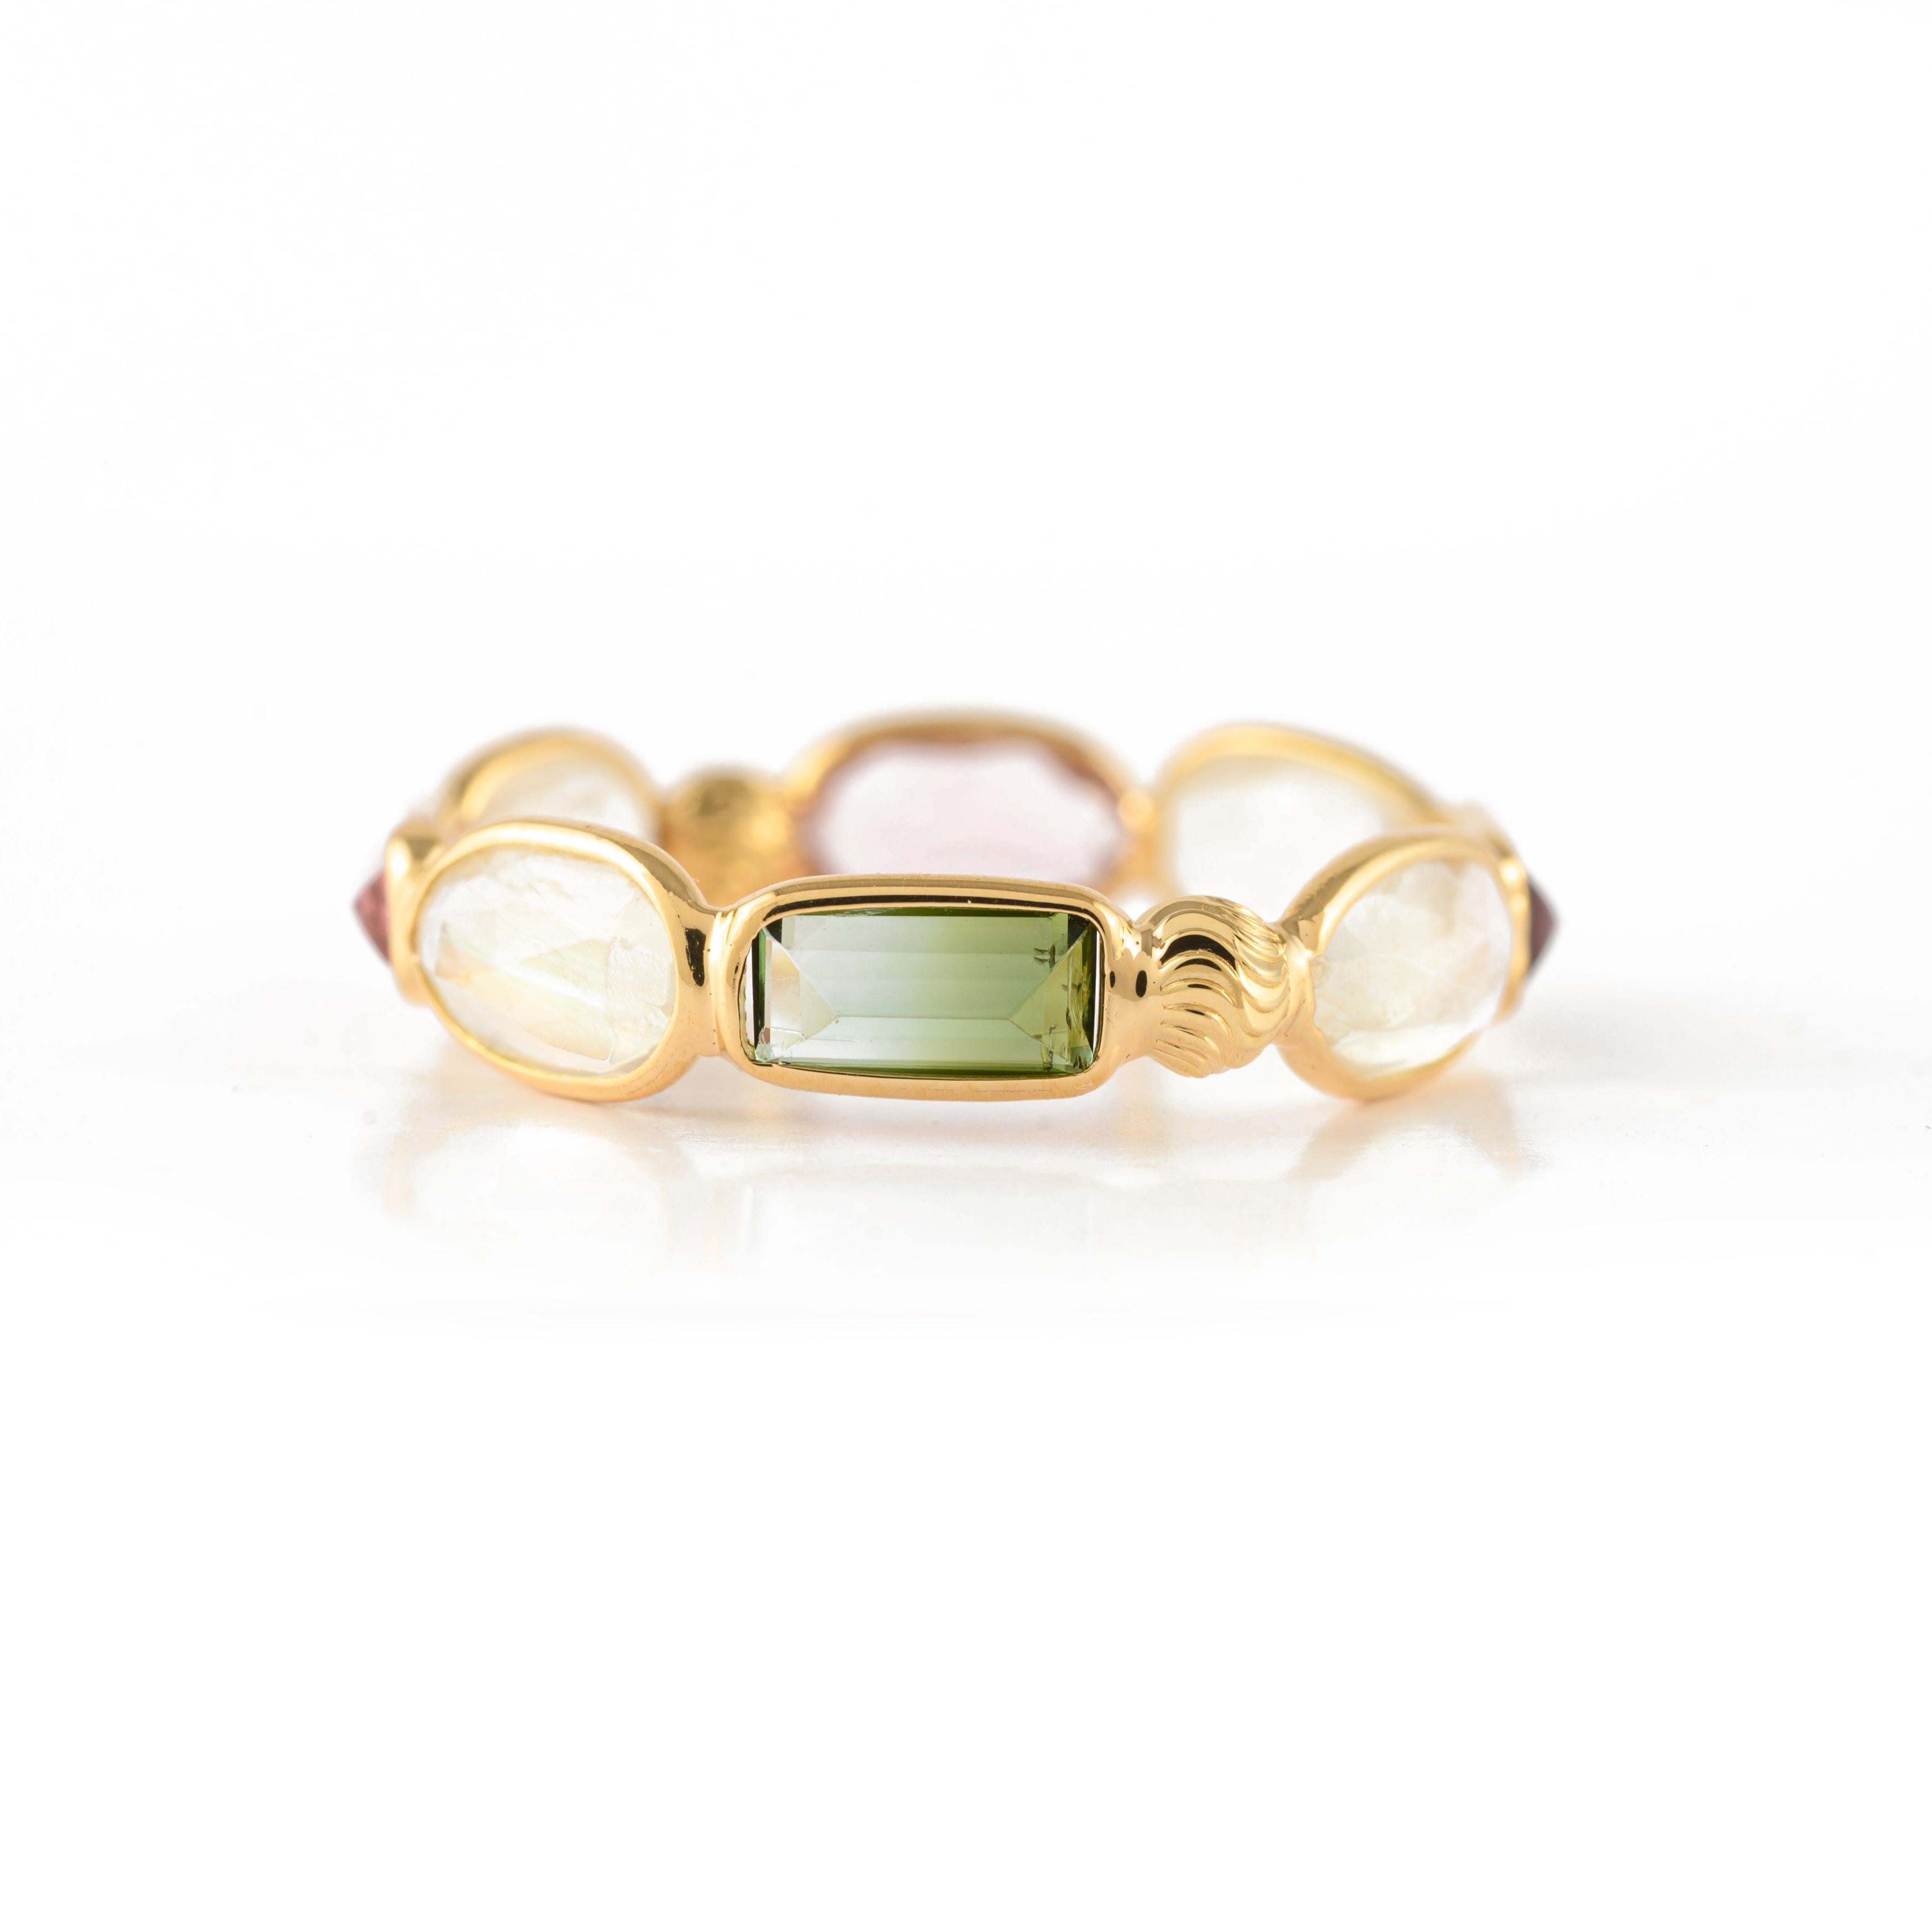 For Sale:  Stackable 2.68ct Moonstone and Tourmaline Eternity Band in 18k Yellow Gold 6